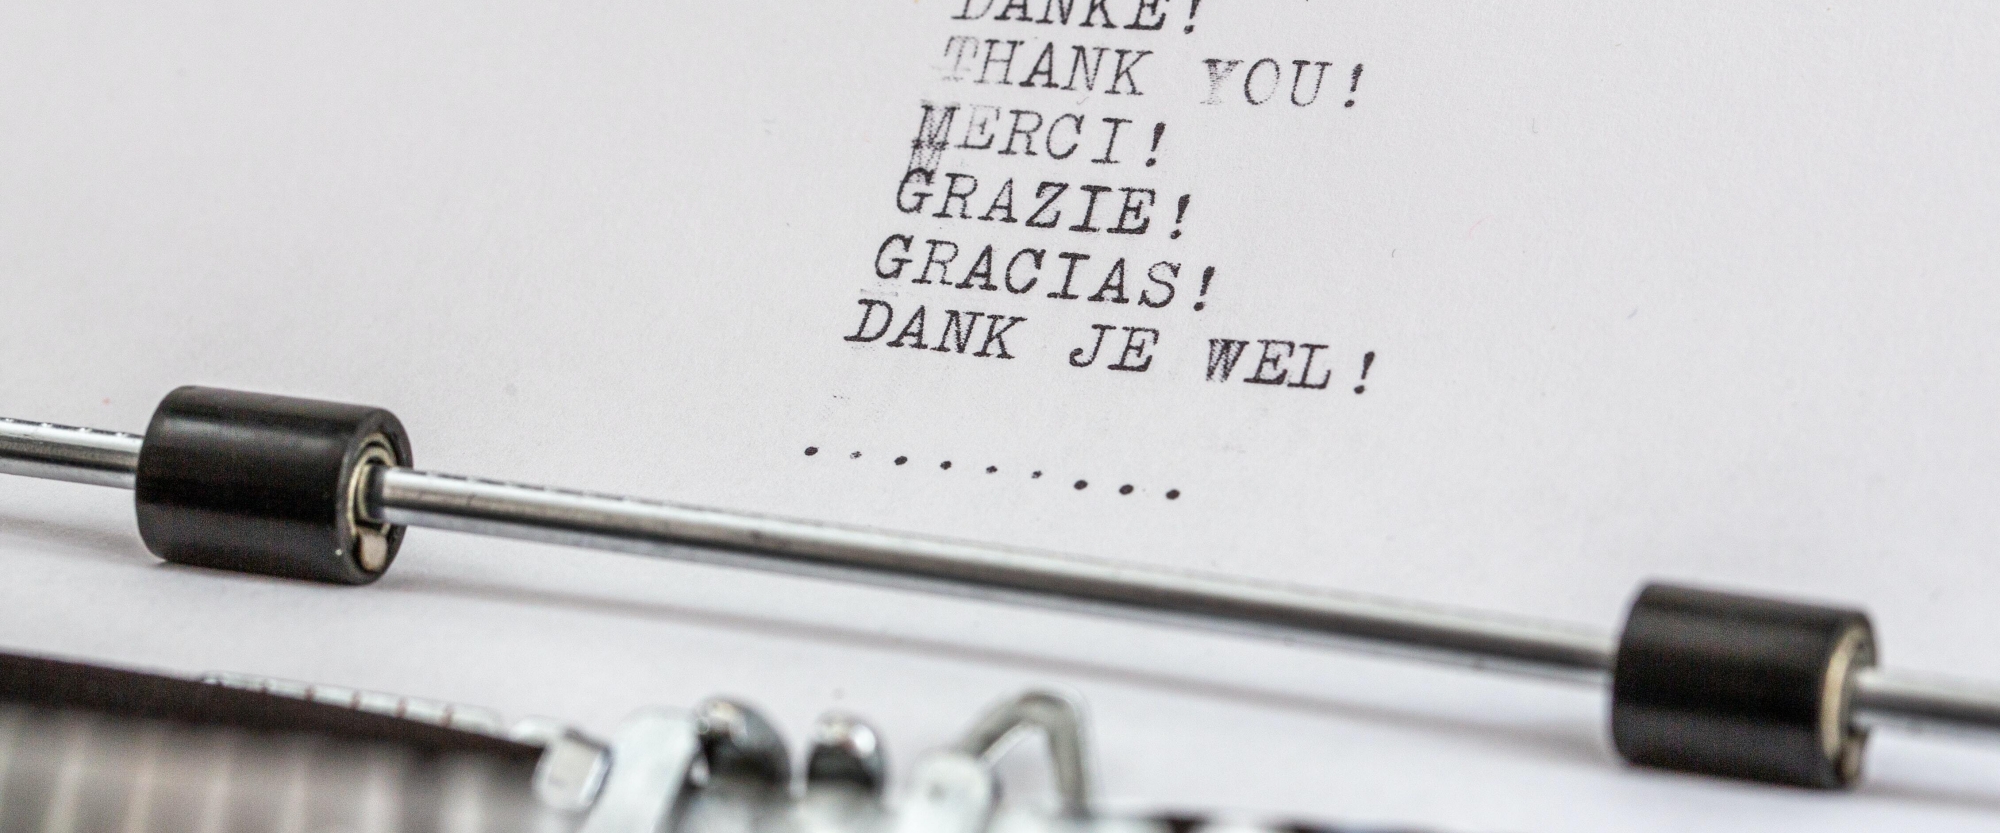 12 Reasons Why Higher Ed Leaders Are Grateful